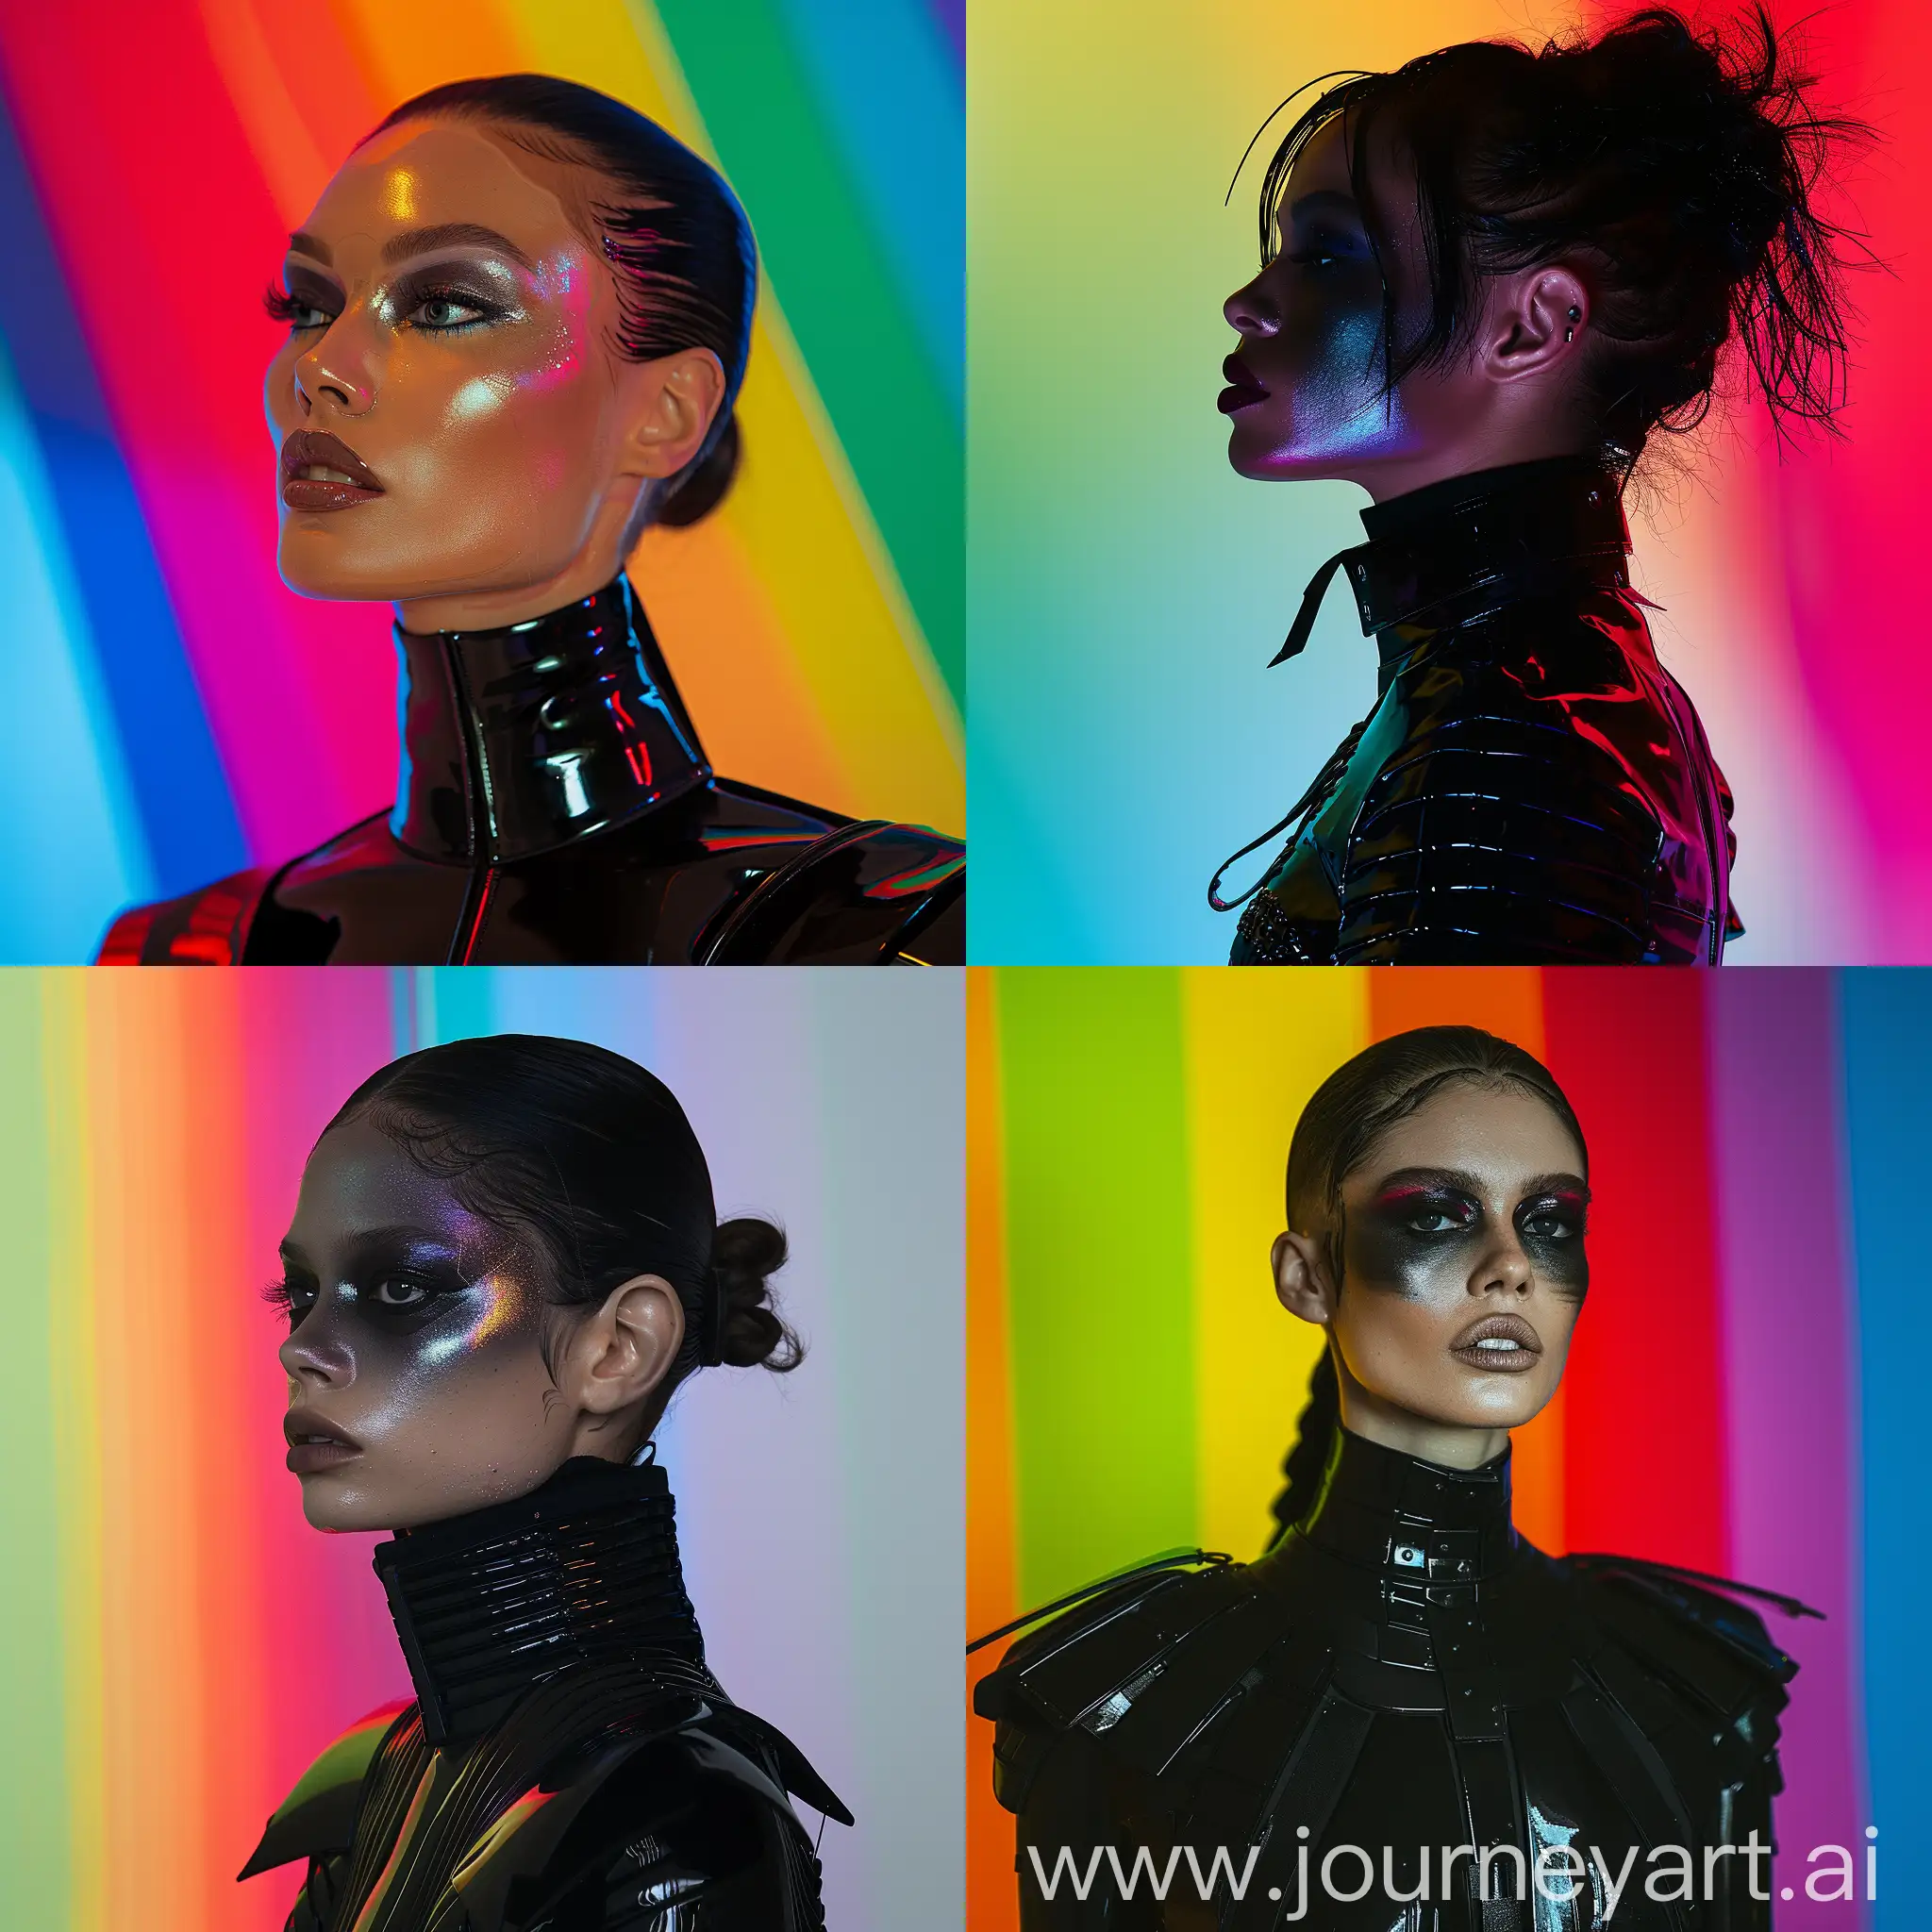 Capture the fierce elegance of a fashion maven adorned in sleek, black lacquered layers reminiscent of futuristic armor. Dark, matte makeup enhances the model's enigmatic allure, intensifying the dramatic impact. Placed against a vivid, saturated rainbow colored background, the interplay of shadows and high-contrast lighting creates an atmosphere of striking power and avant-garde sophistication, delivering a bold and unforgettable visual statement --s 200 